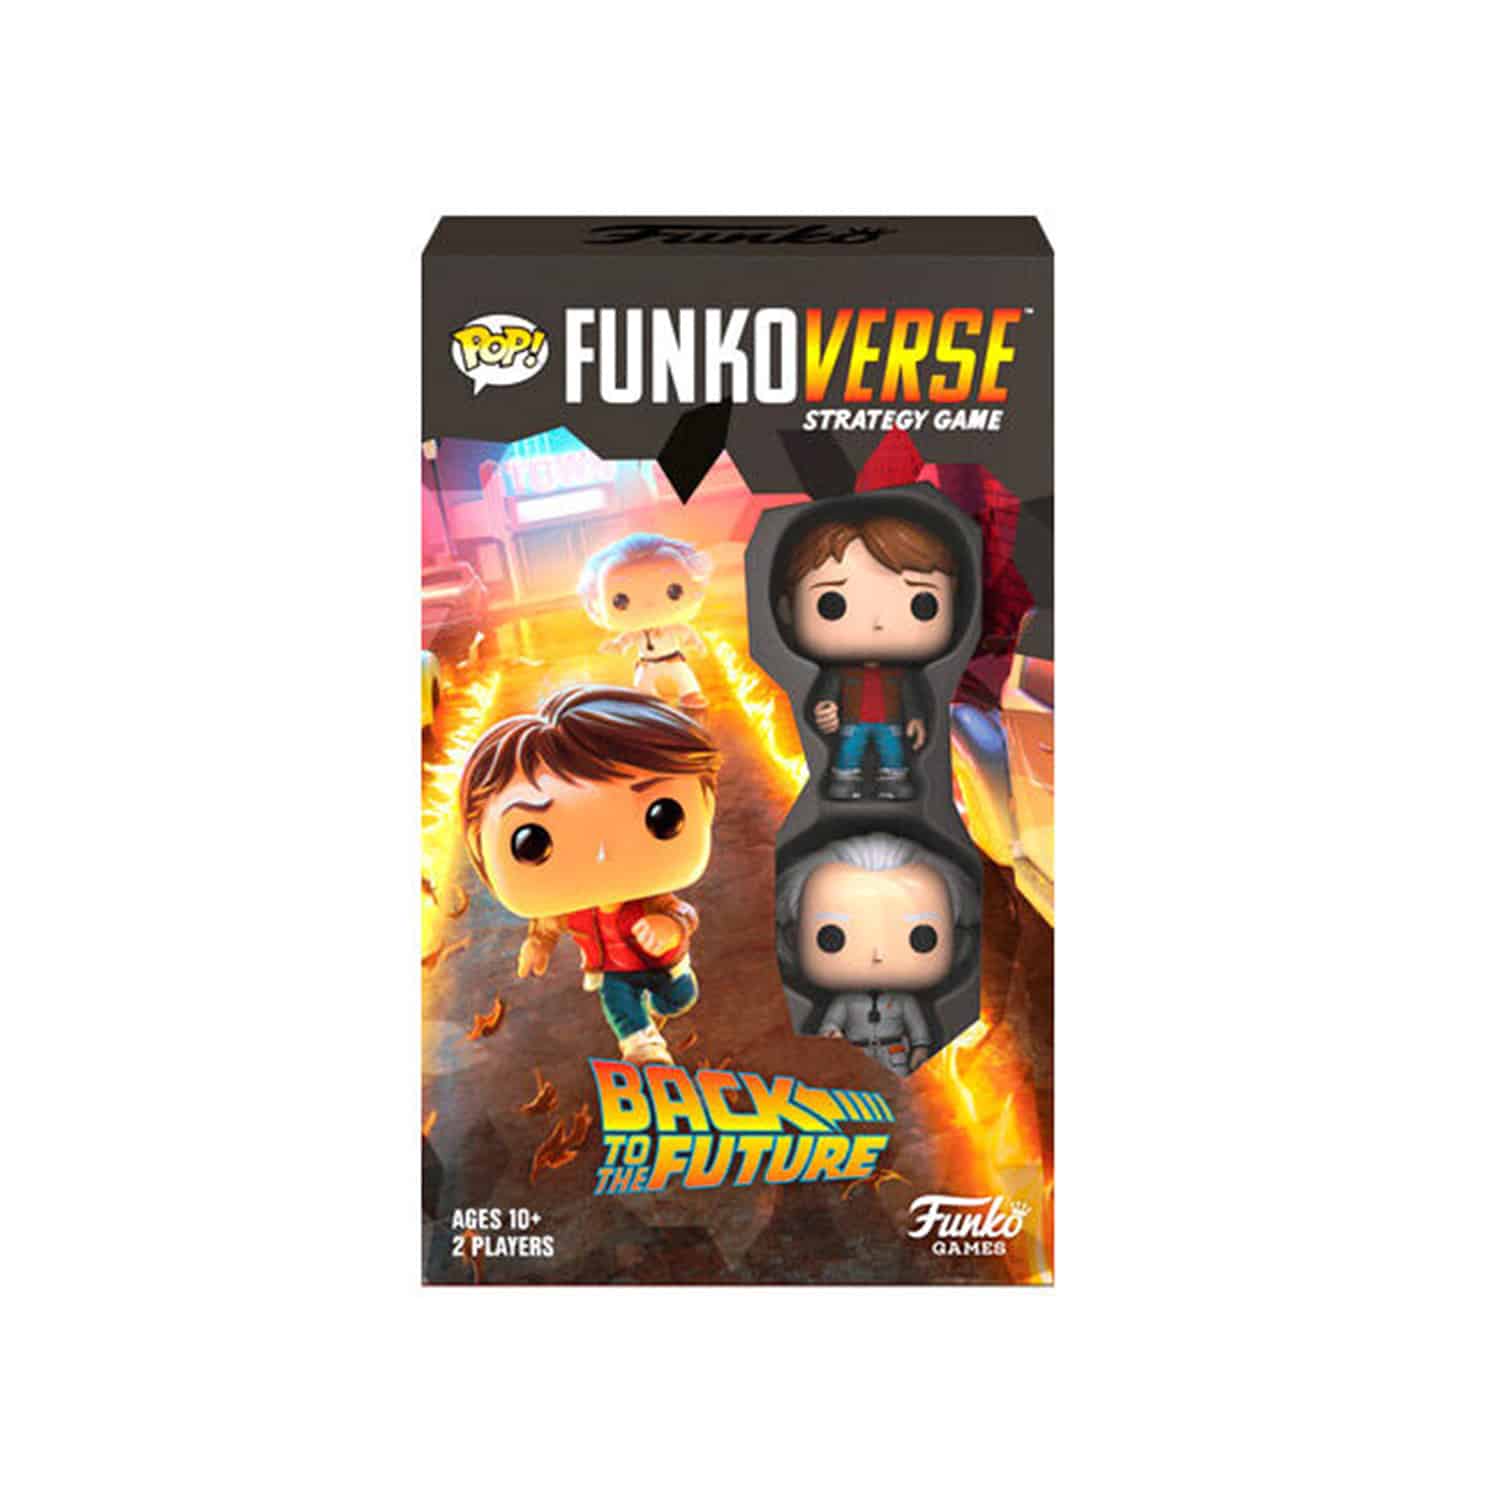 Back to the Future - Funkoverse Board Game